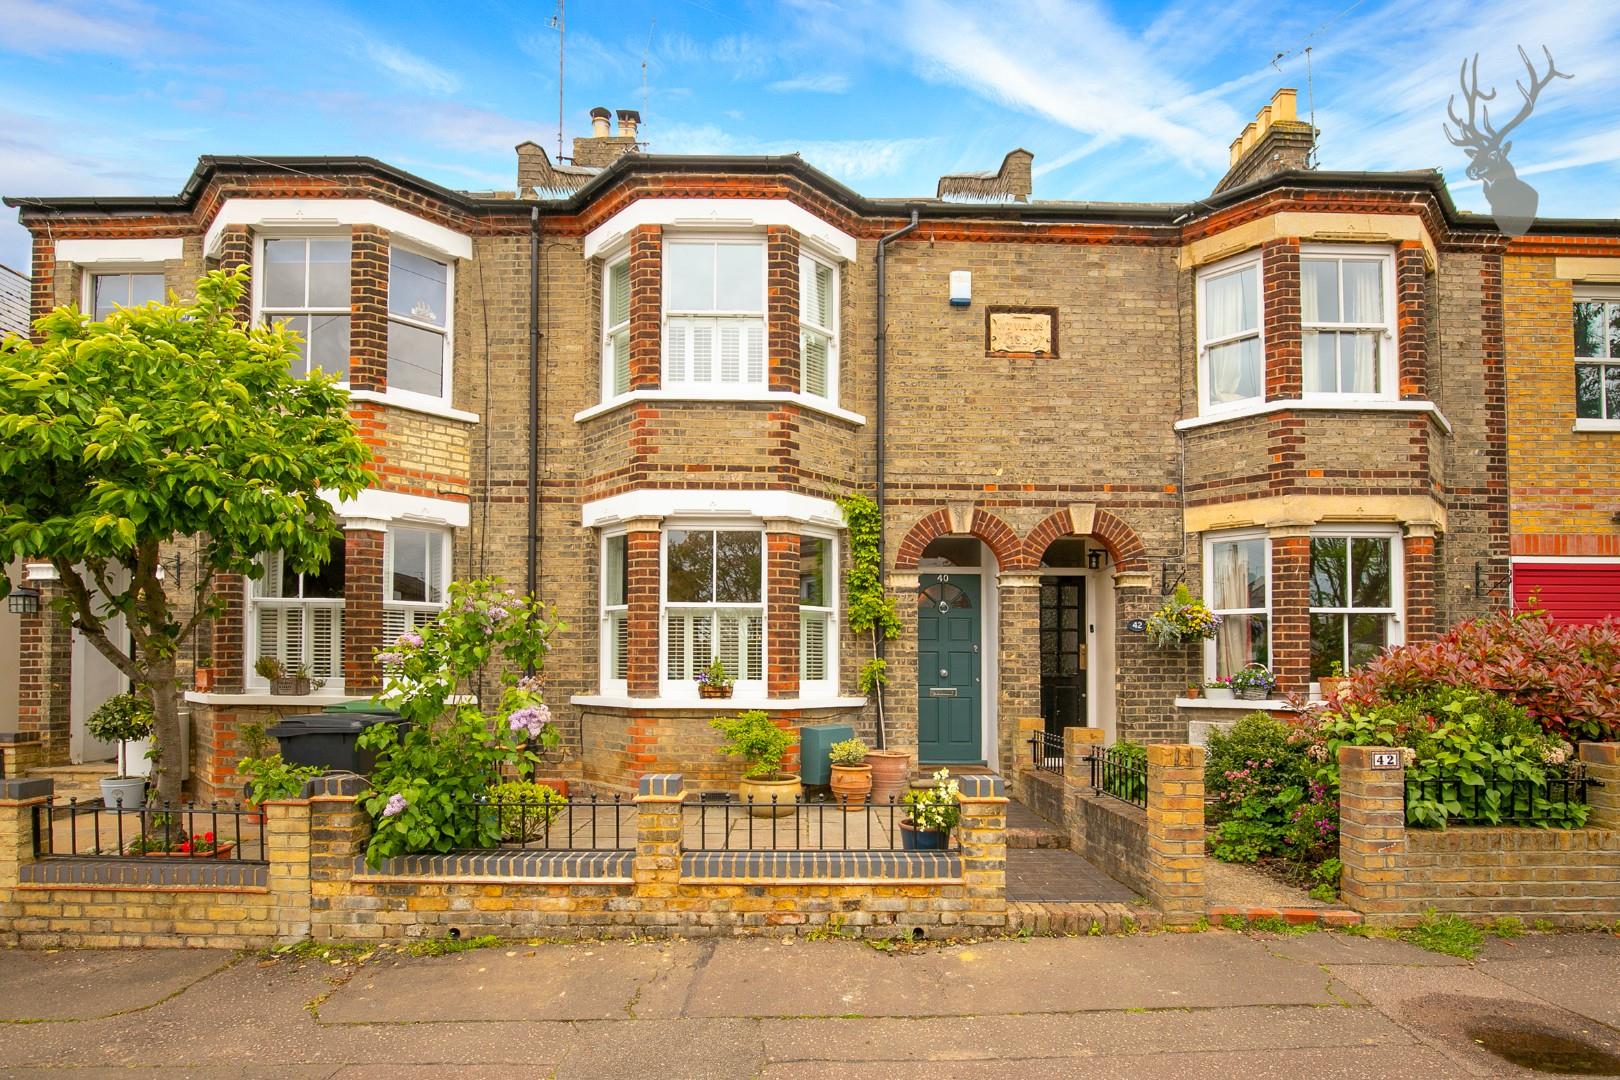 Similar Property: House - Terraced in Epping